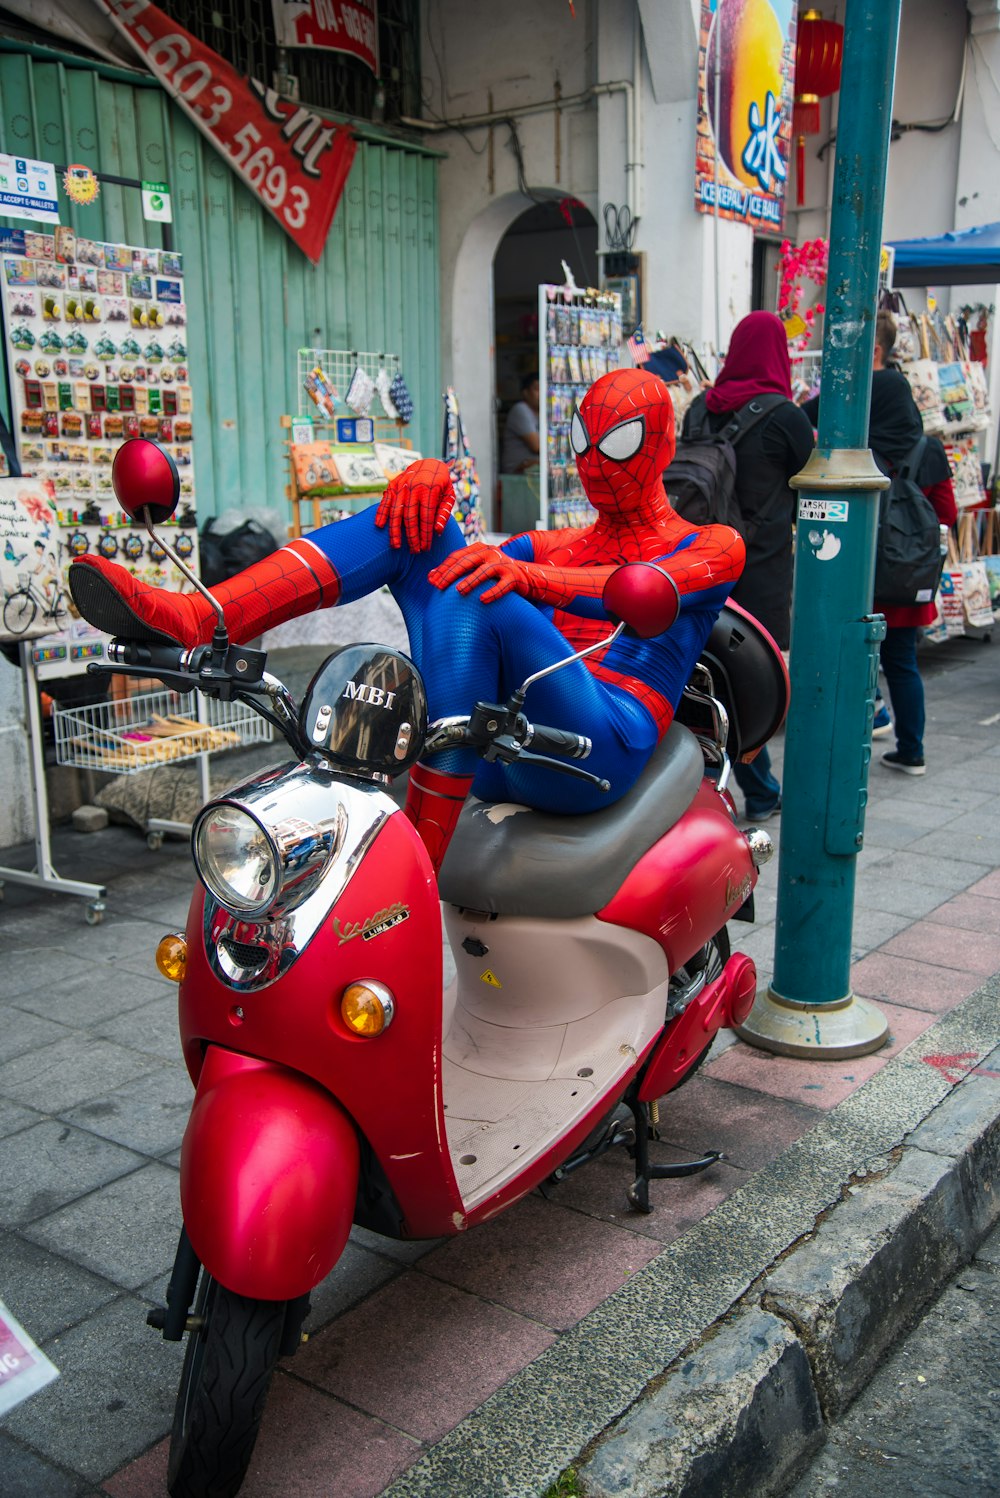 Spider-Man sitting on the motor scooter